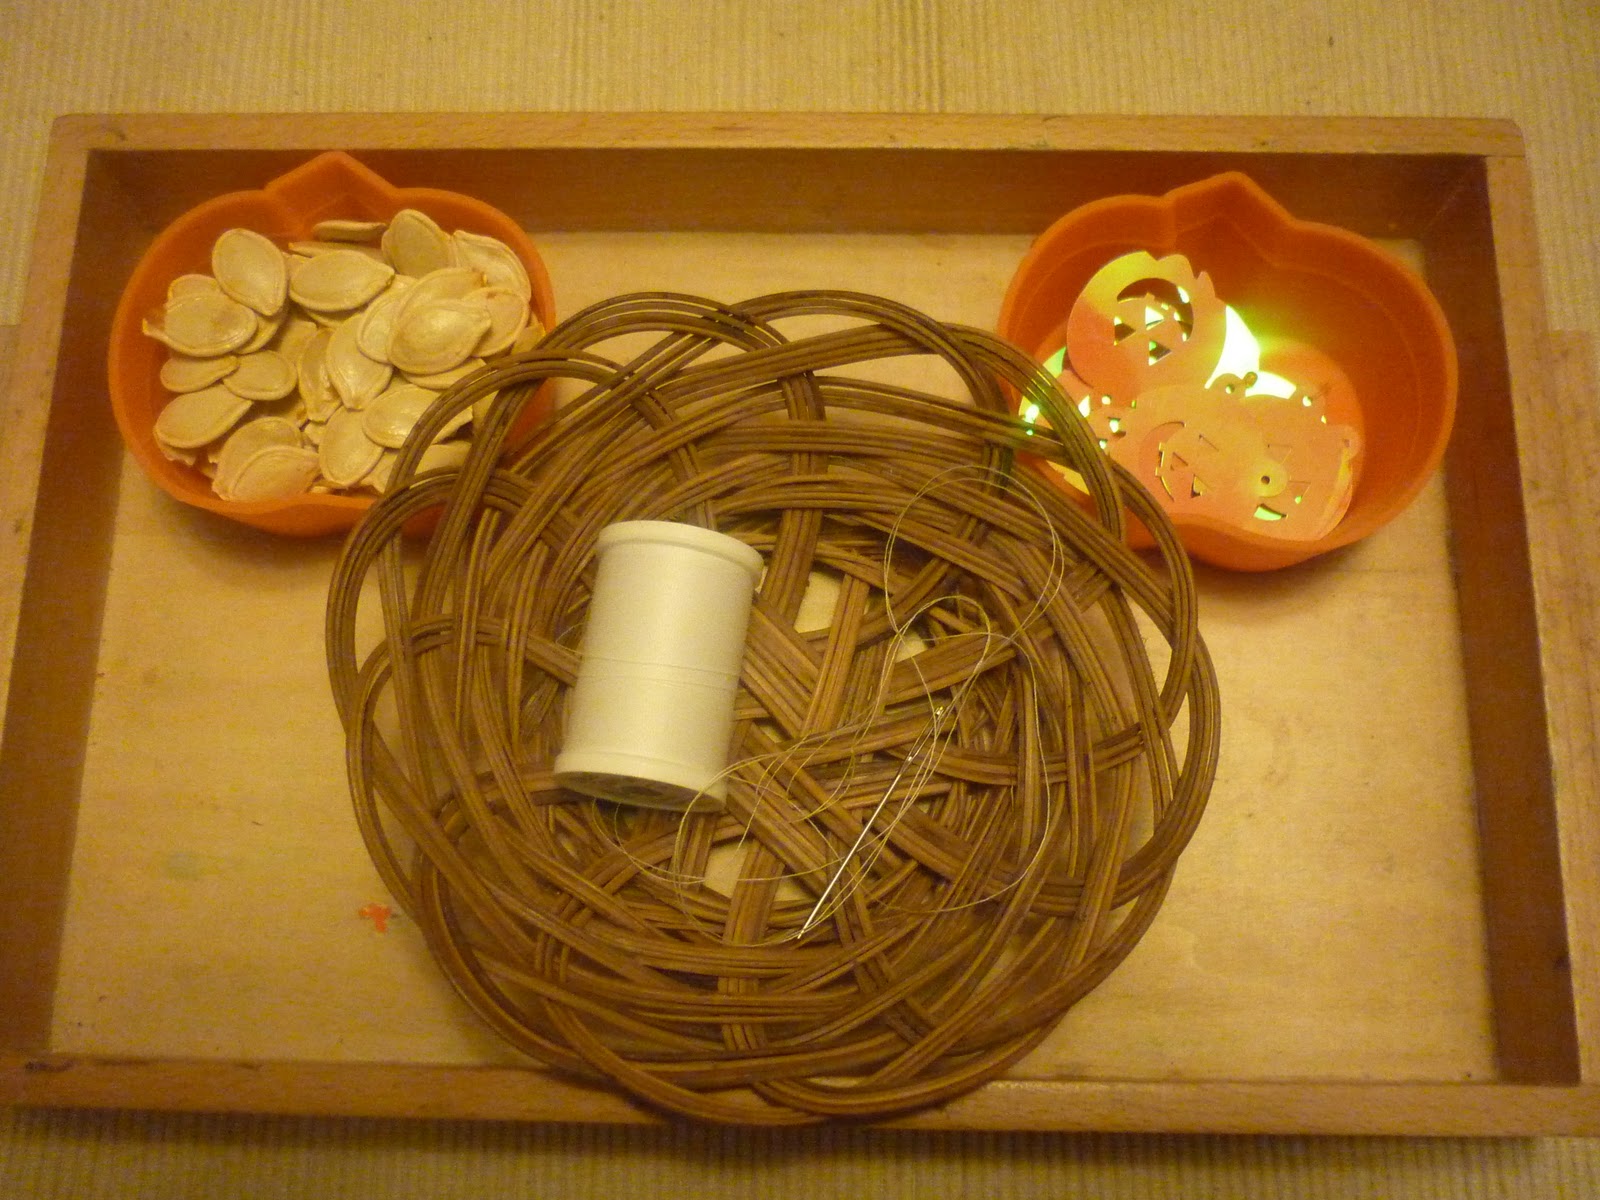 Pumpkin Seed Necklace Activity (Photo from The Work Plan)